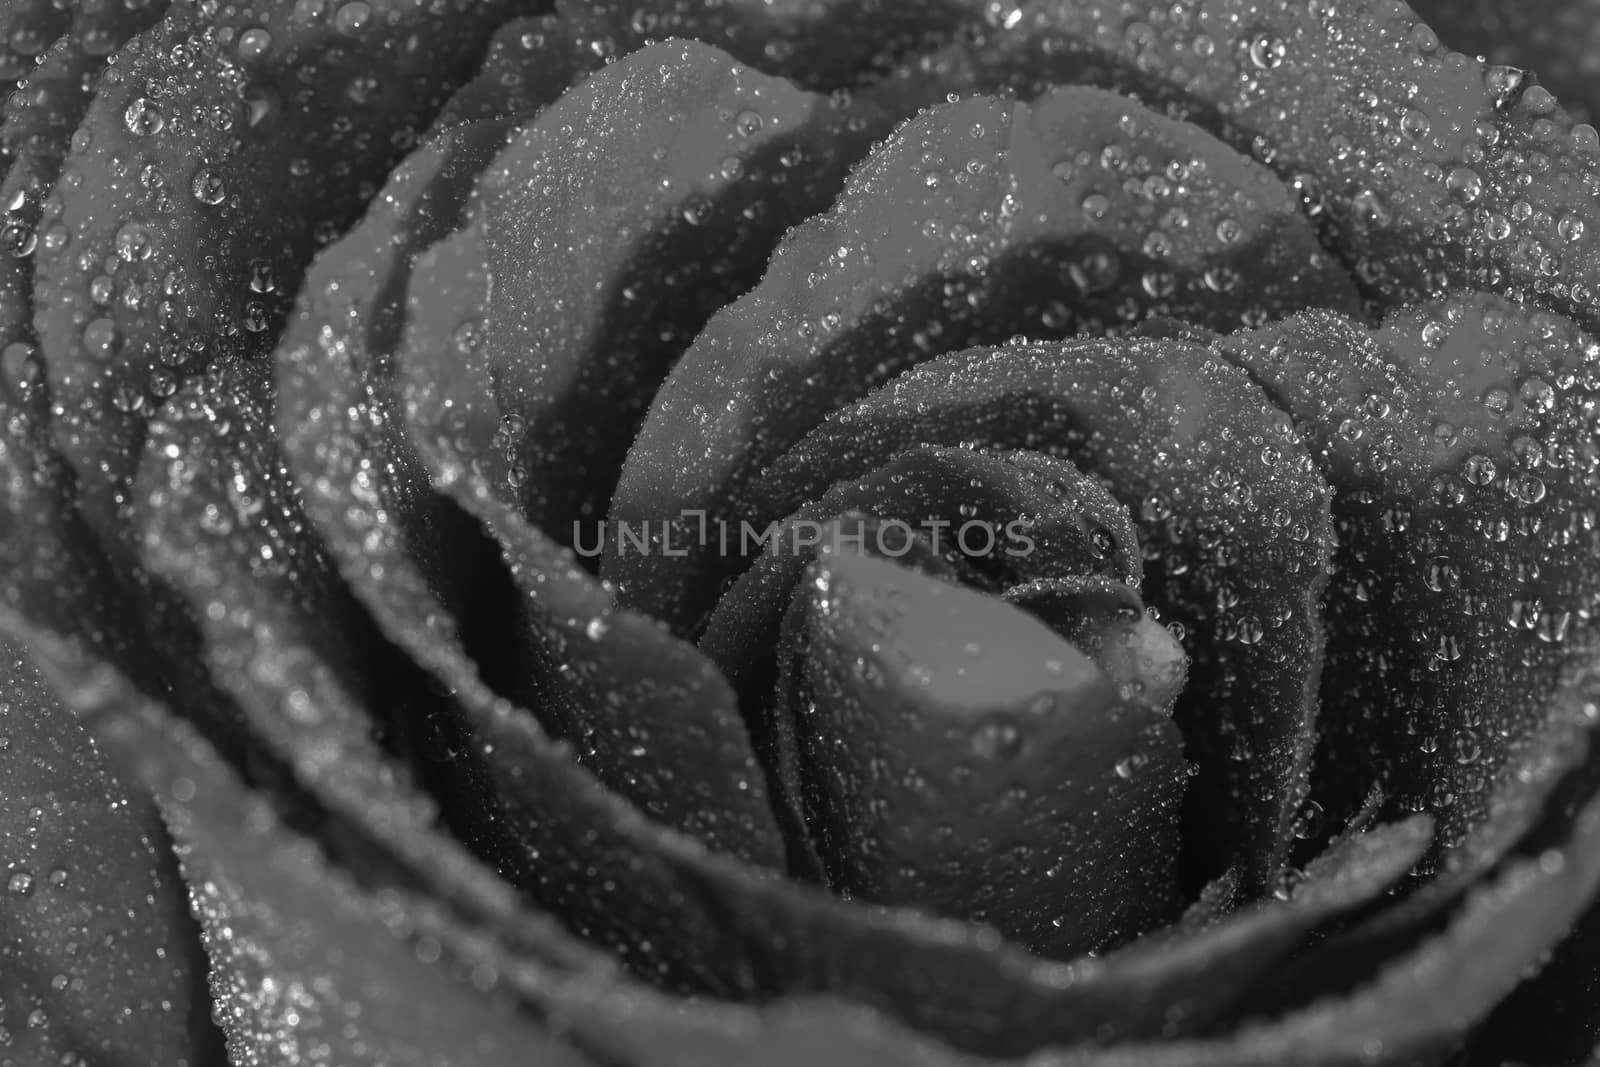 Rose flower with water droplets, Black and white